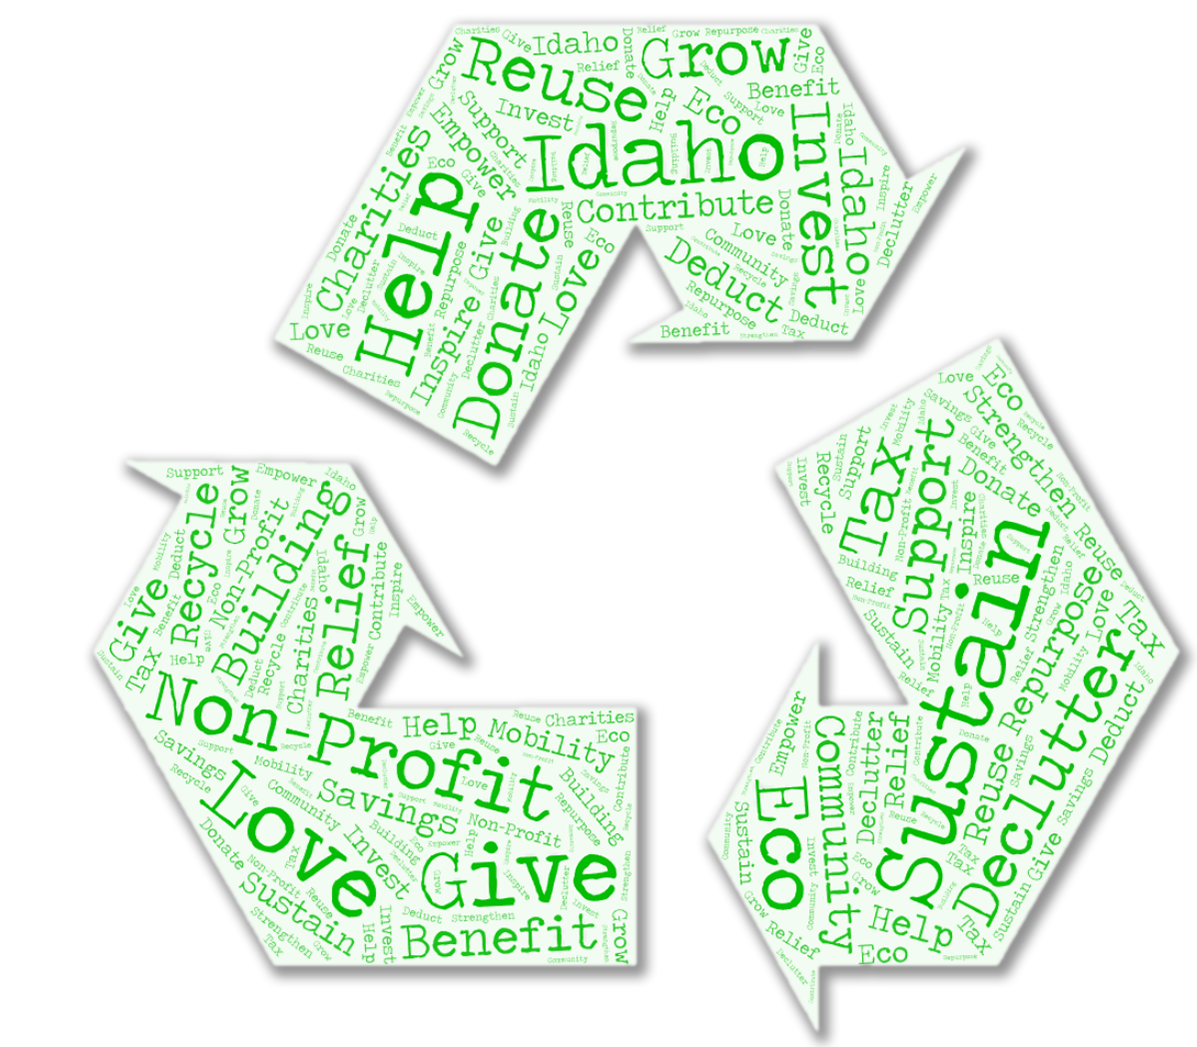 Word cloud of terms related to non-profits, sustainability and giving.